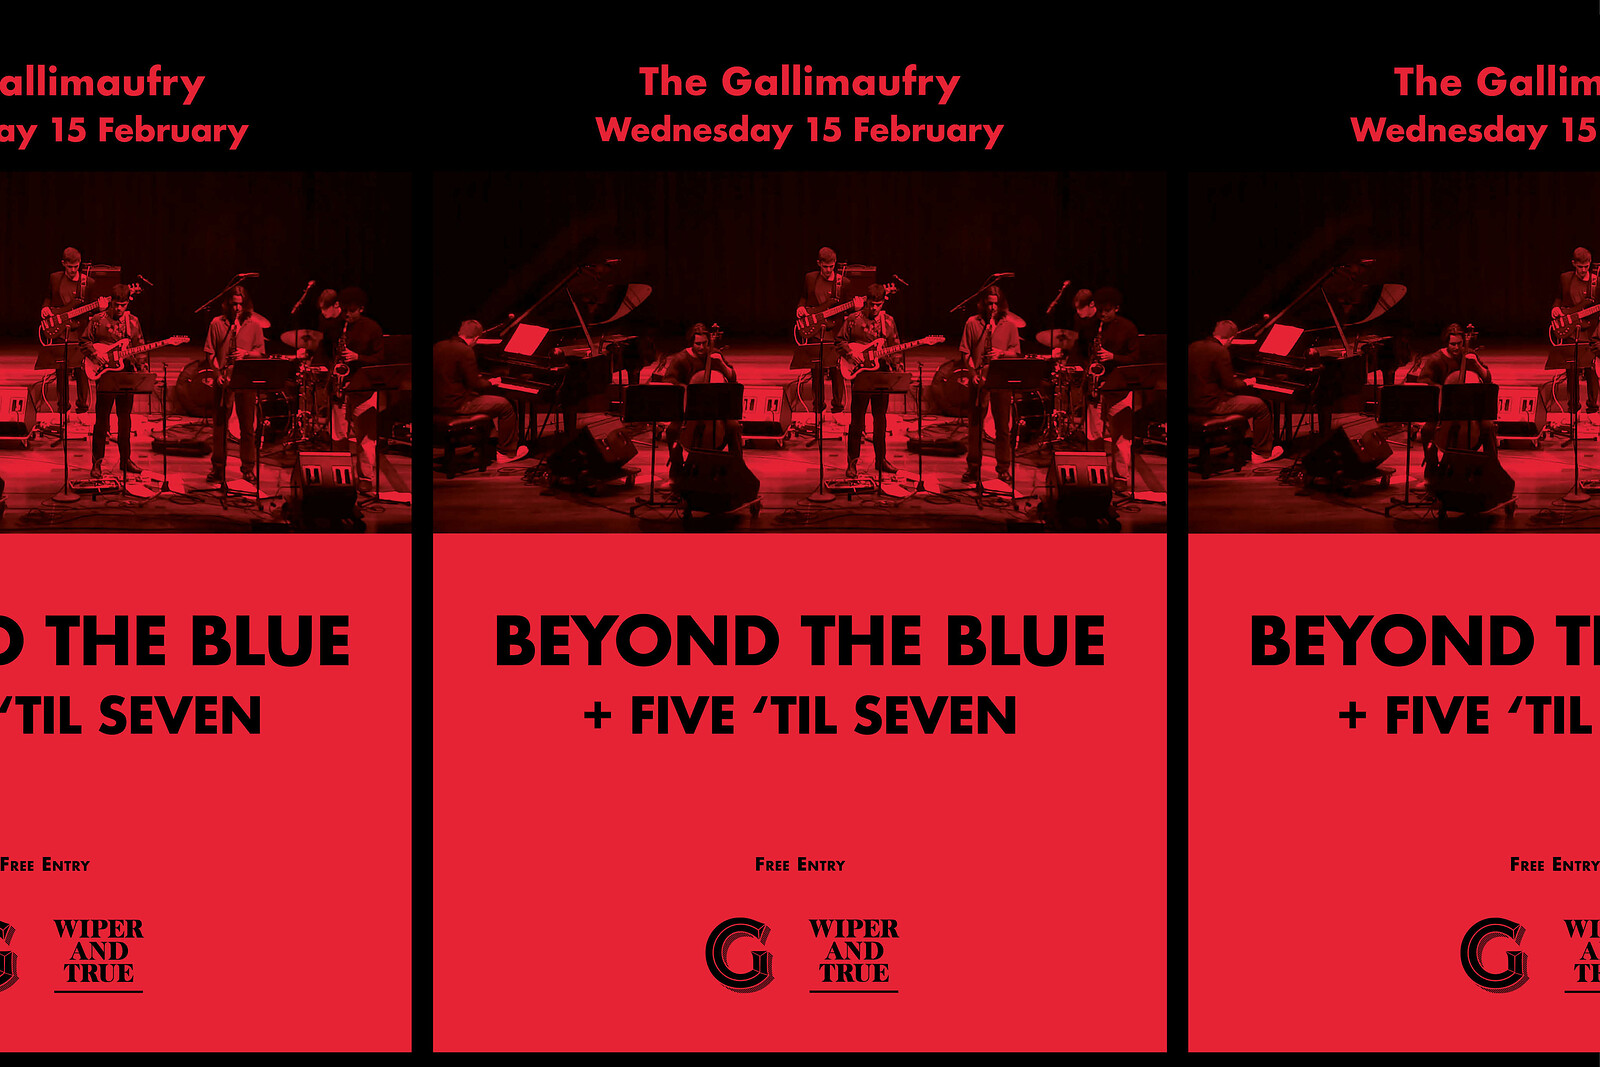 Beyond The Blue + Five 'til Seven at The Gallimaufry